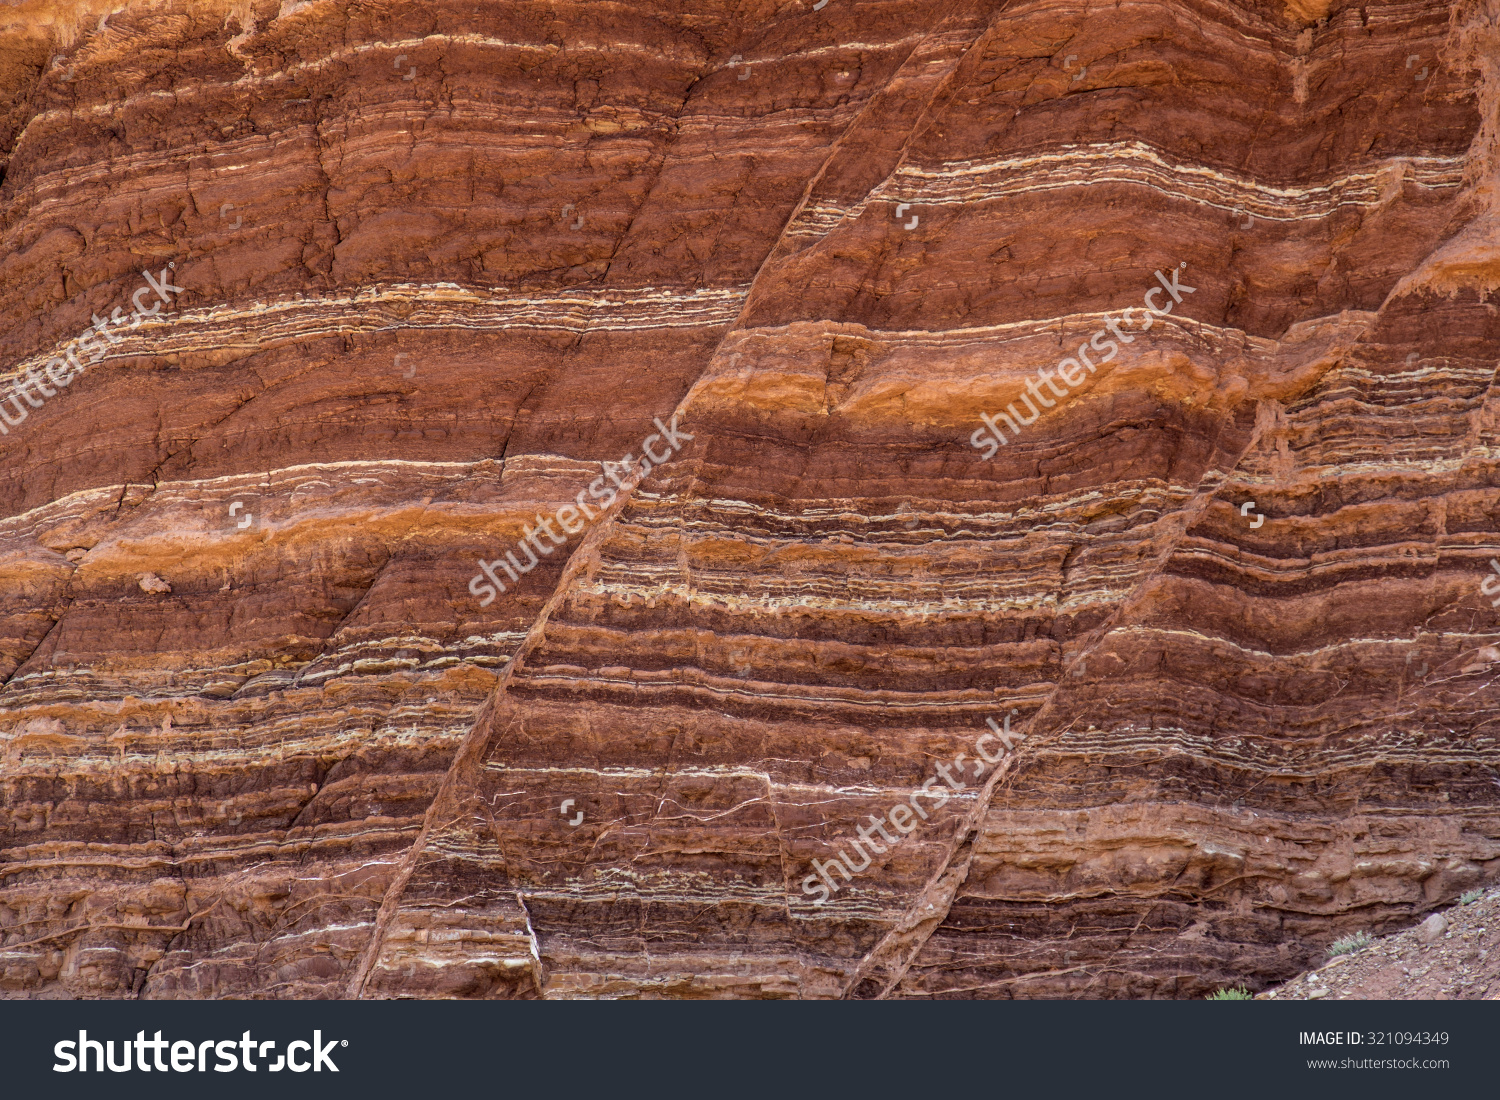 Fault Lines Colorful Layers Sandstone Useful Stock Photo 321094349.